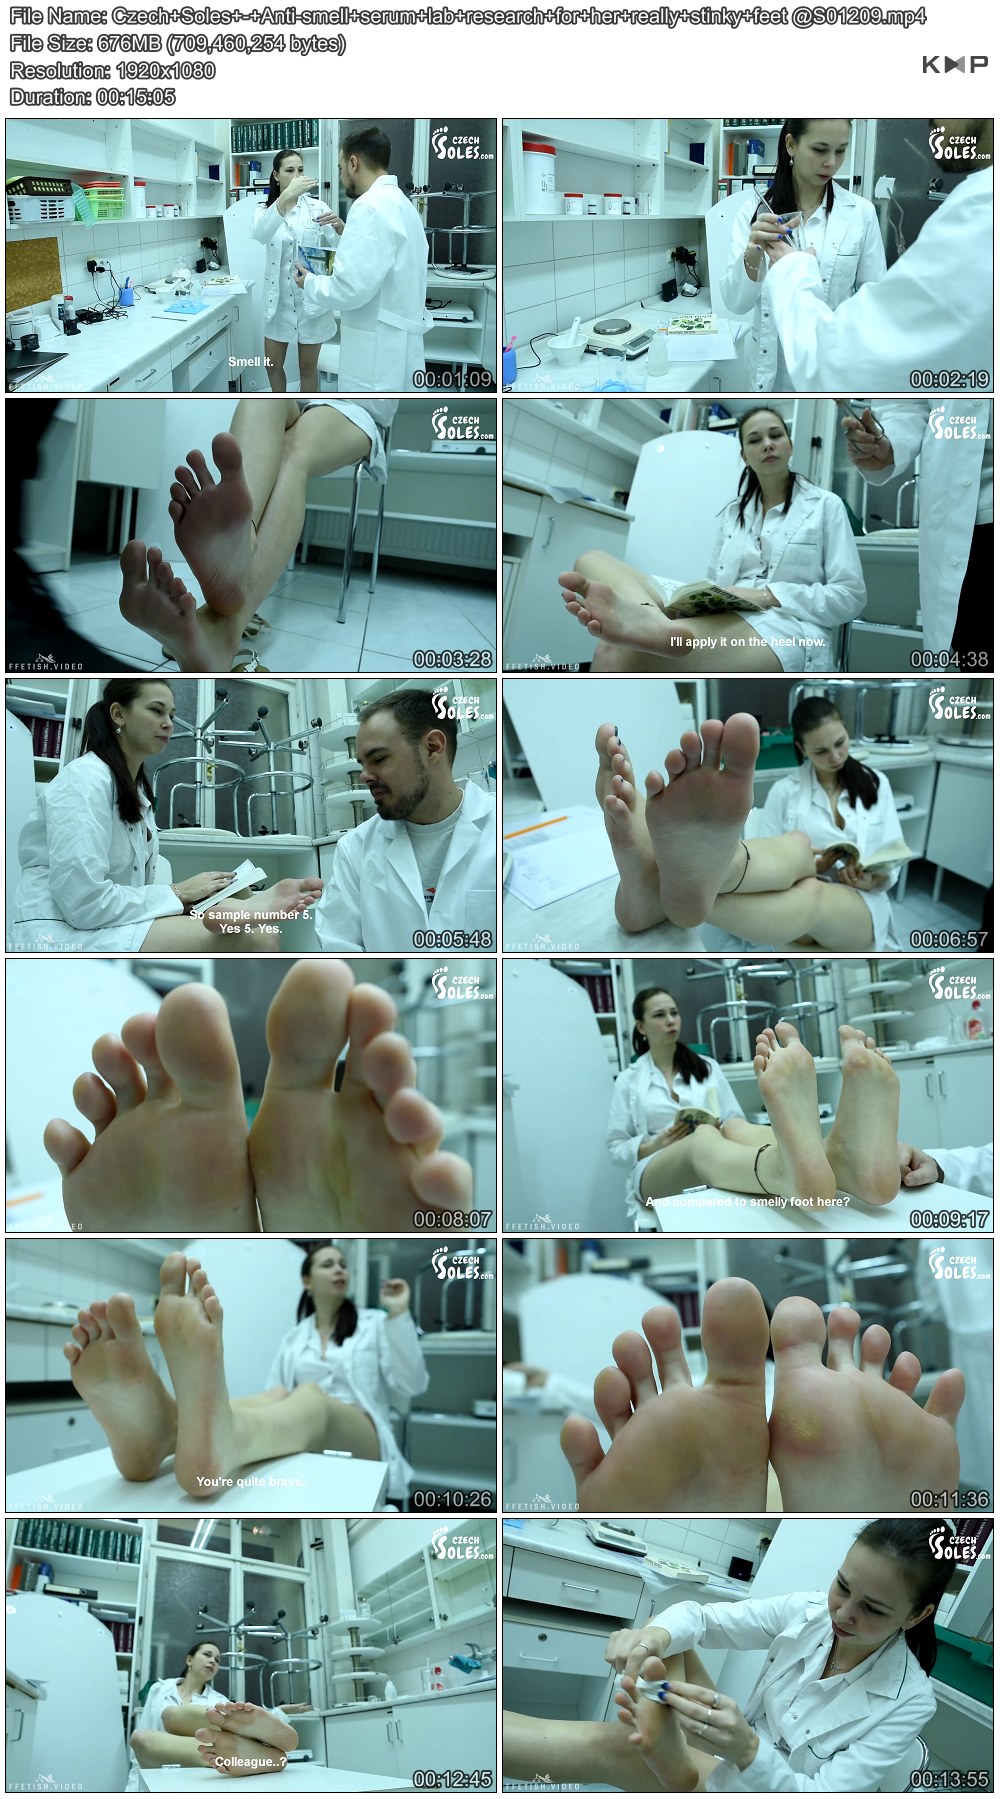 Czech Soles - Anti-smell serum lab research for her really stinky feet @S01209.JPG